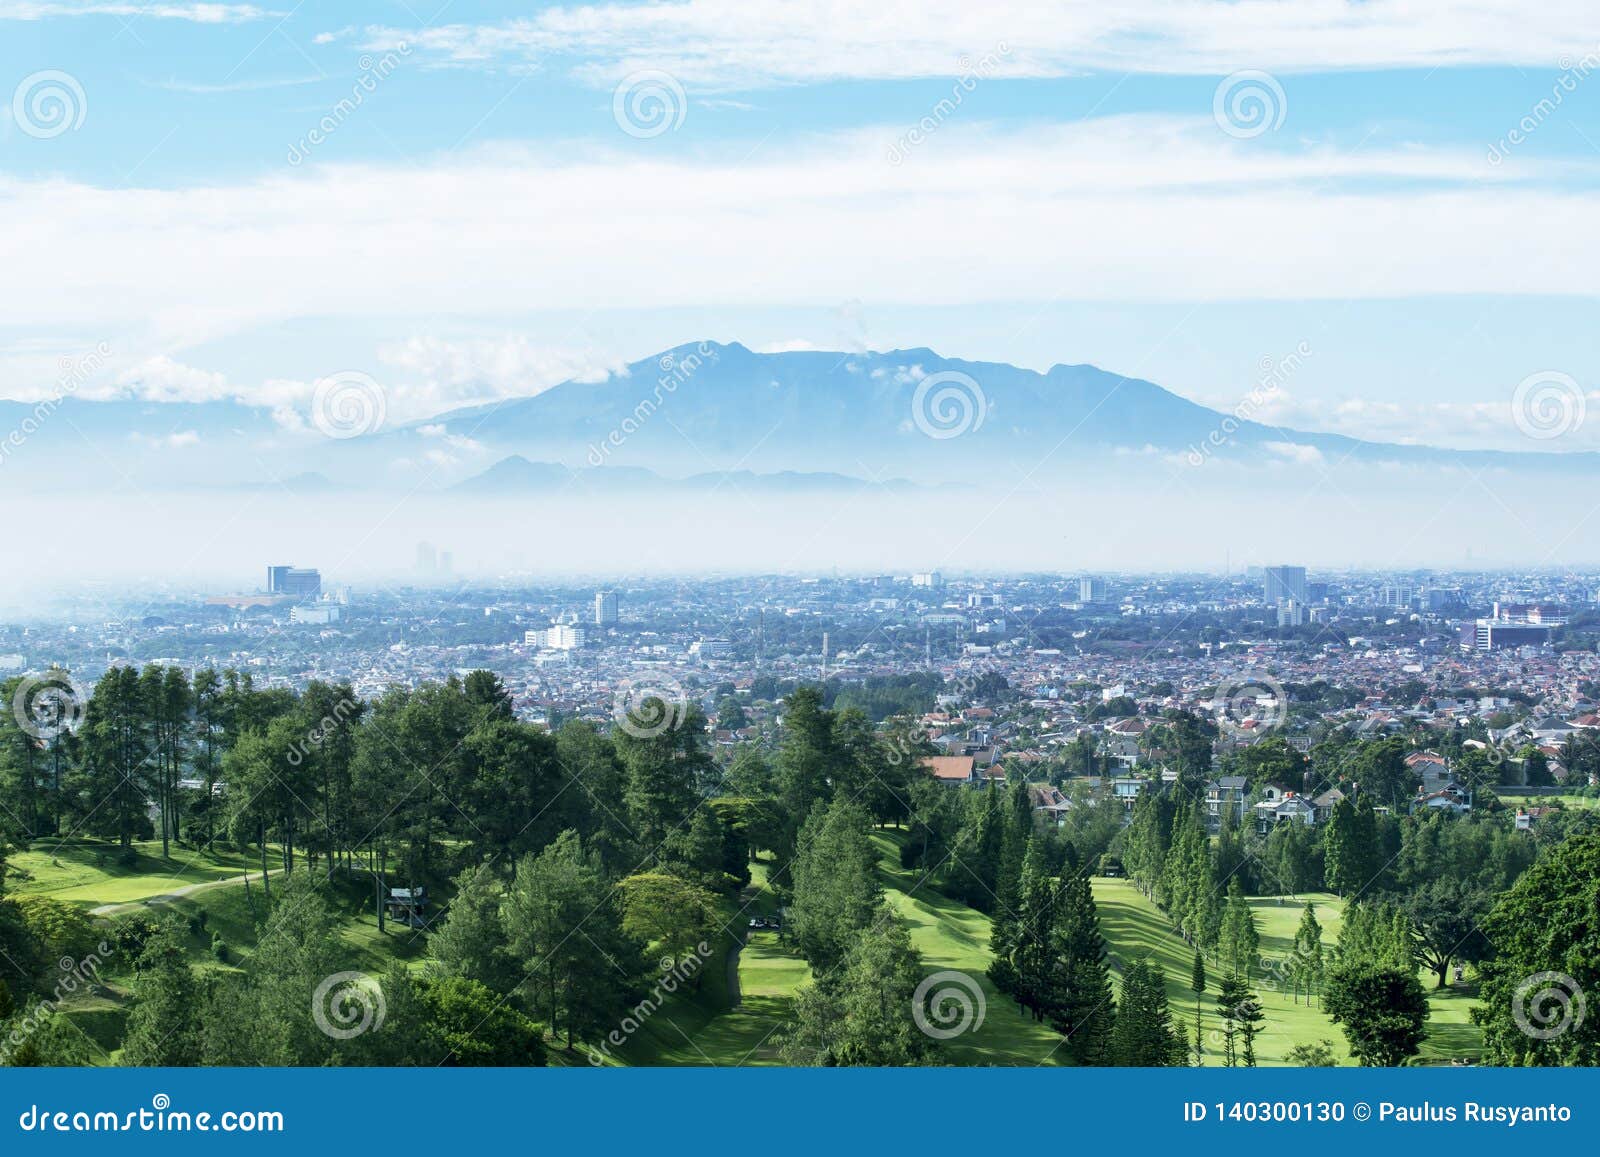 golf course with misty bandung cityscape background